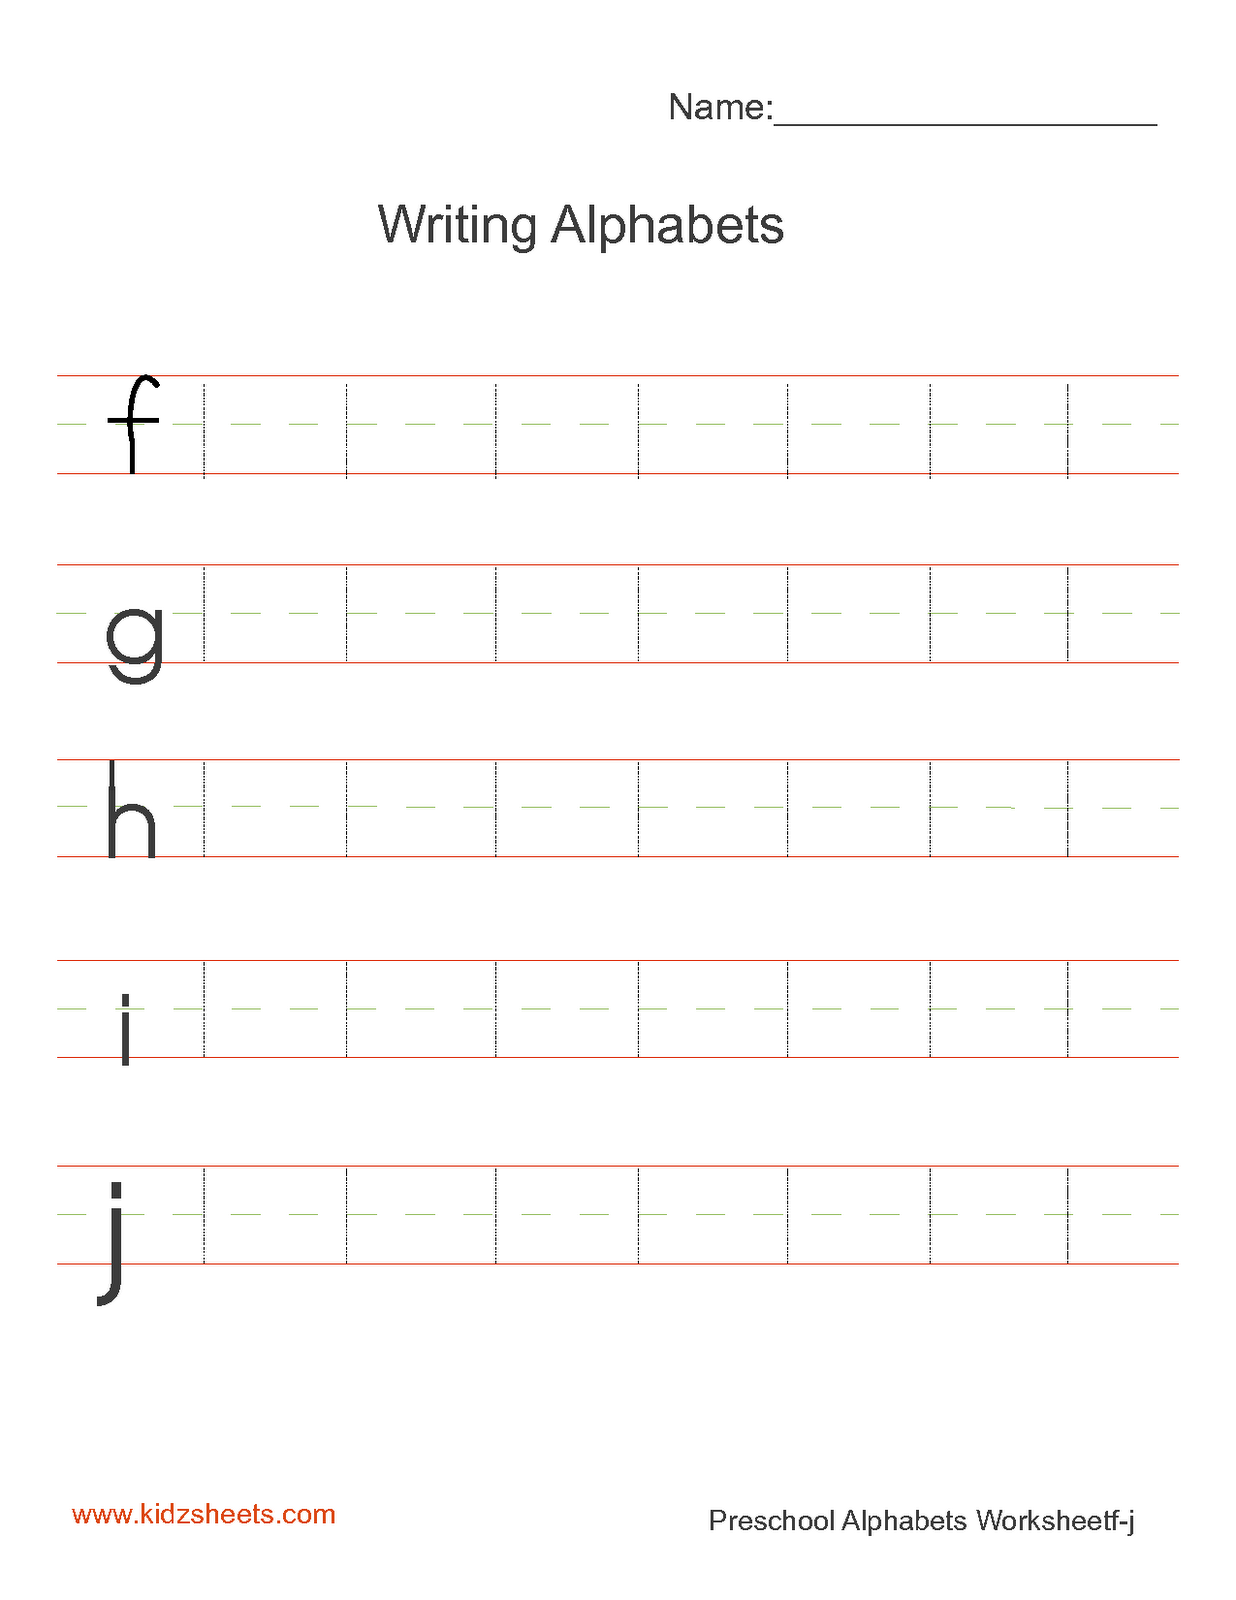 Writing Lower Case Alphabets